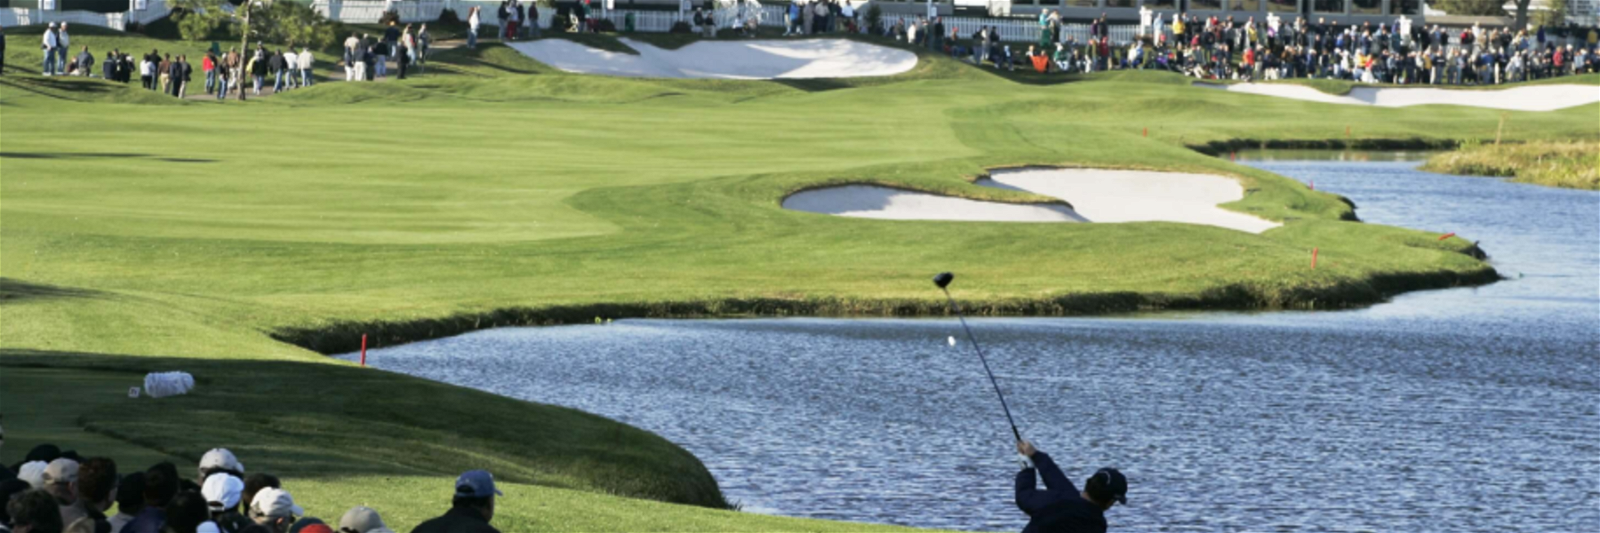 Golf Vacation Package - Tampa Resort Summer Deal for only $220 per person per day!